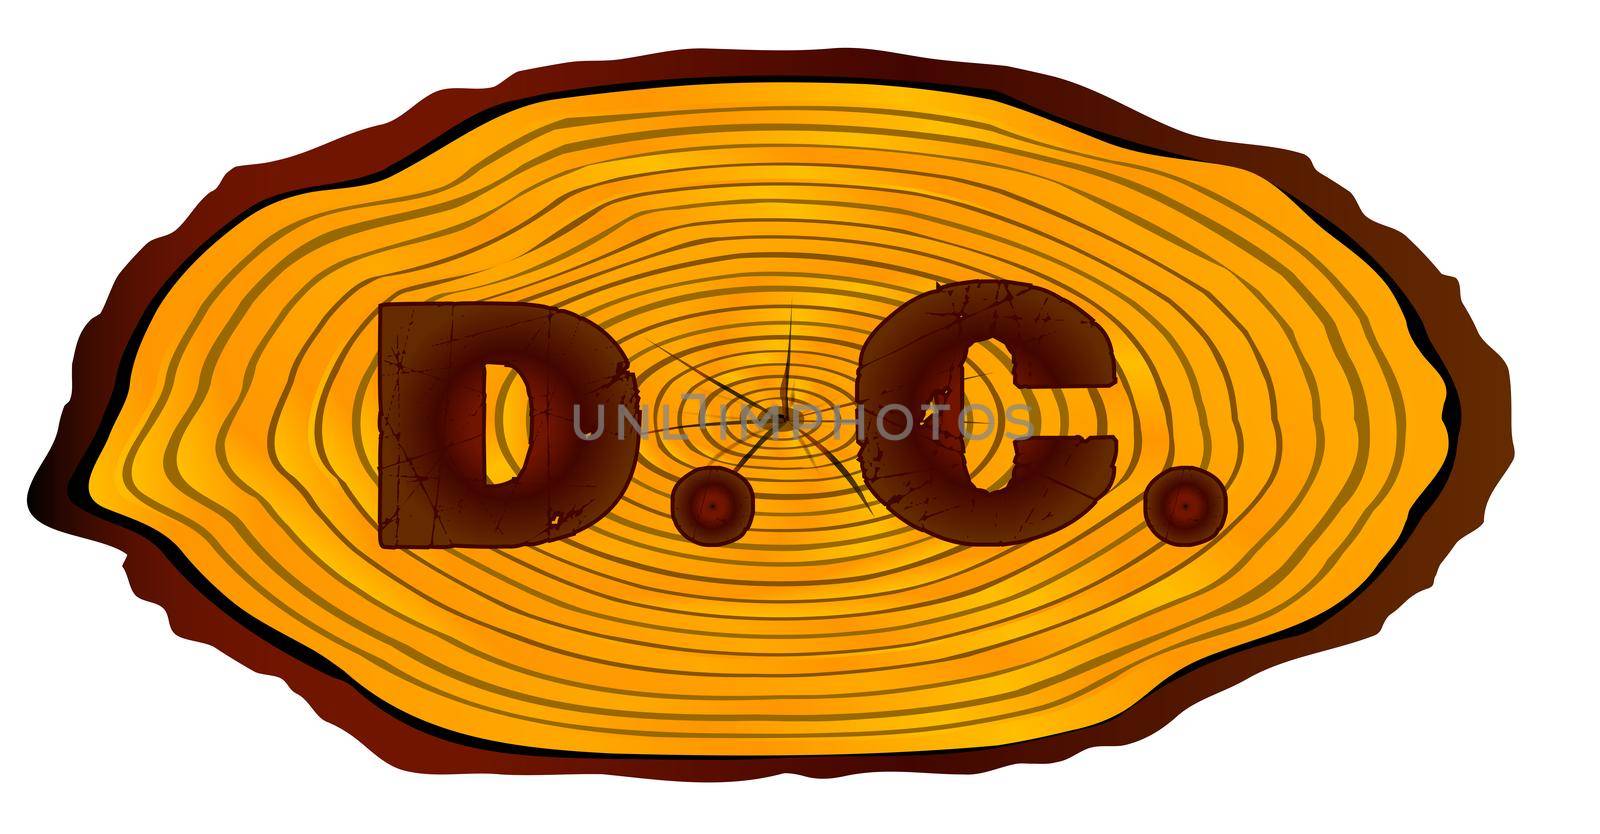 A section of a sawn log with the words D.C. over a white background